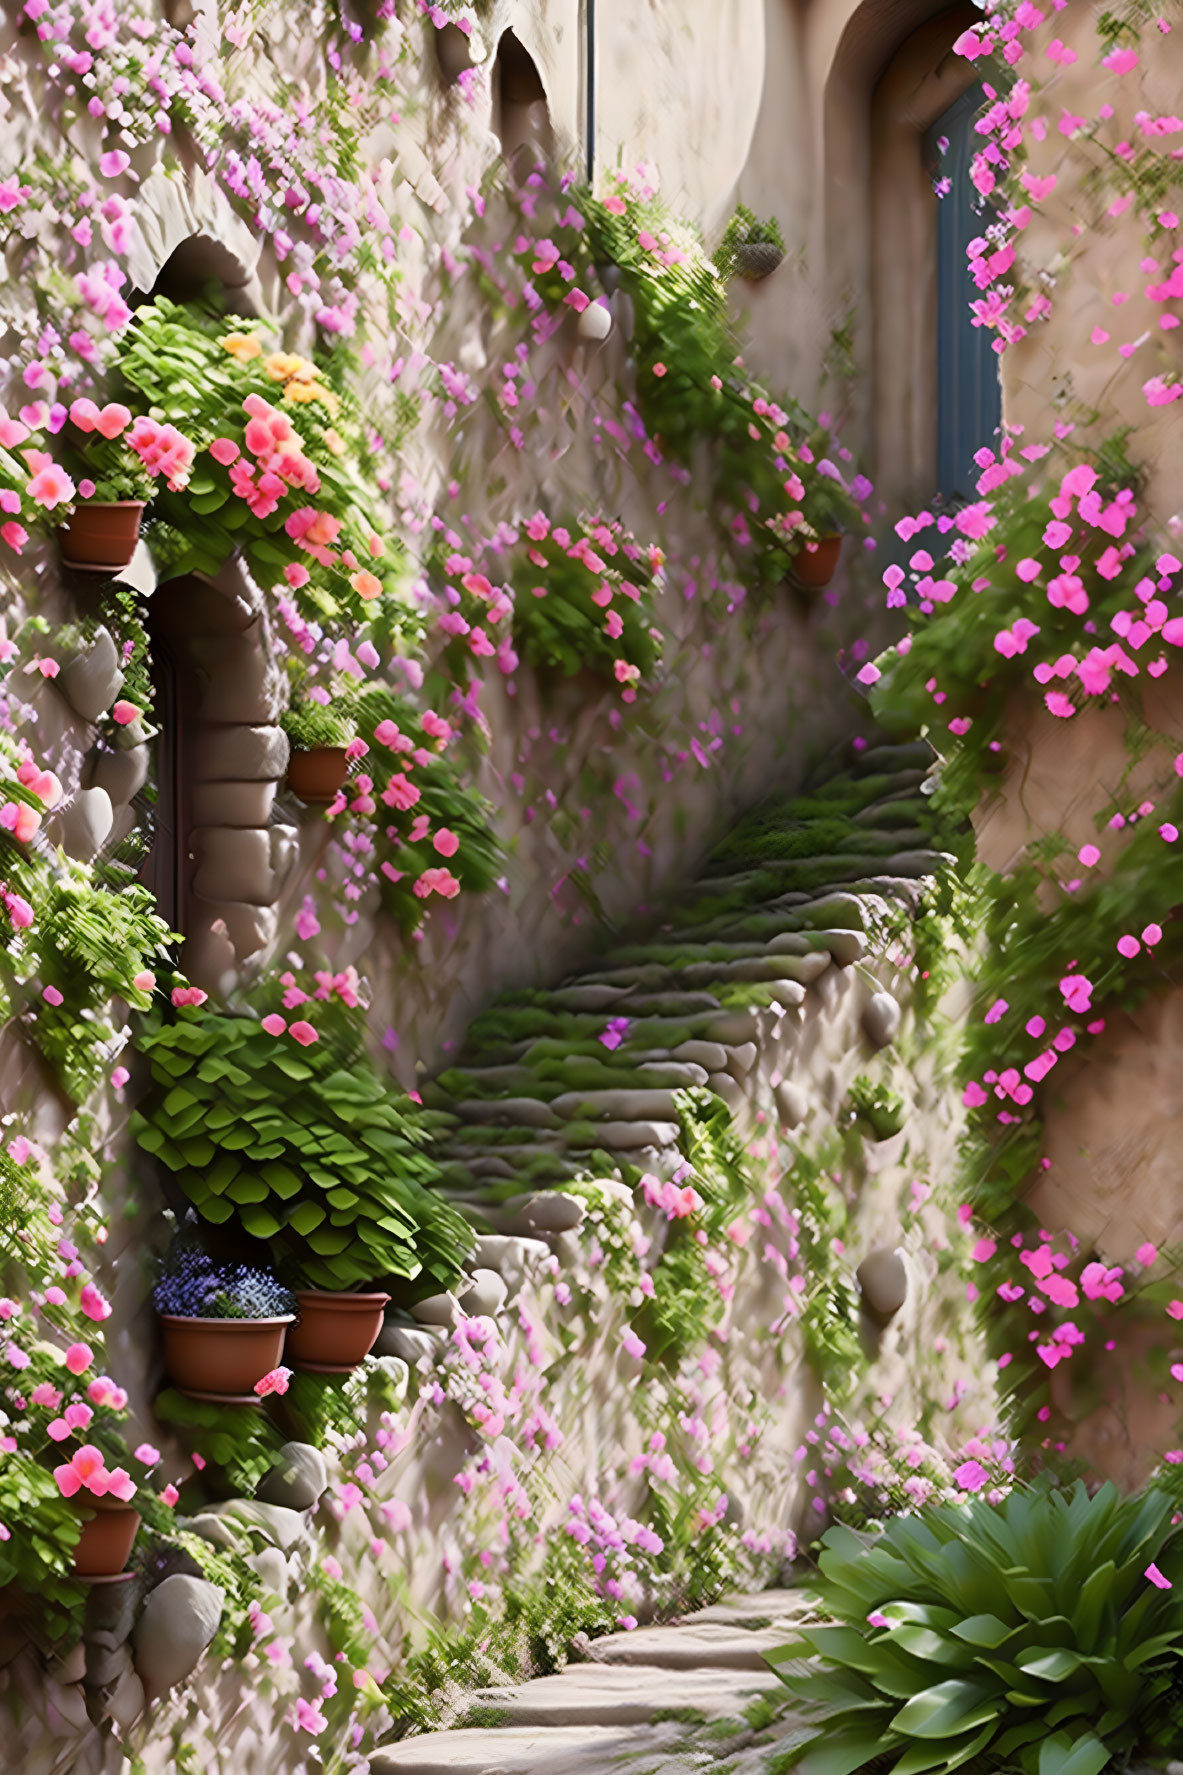 Stone stairway with pink bougainvillea, potted plants, and ivy under warm lighting